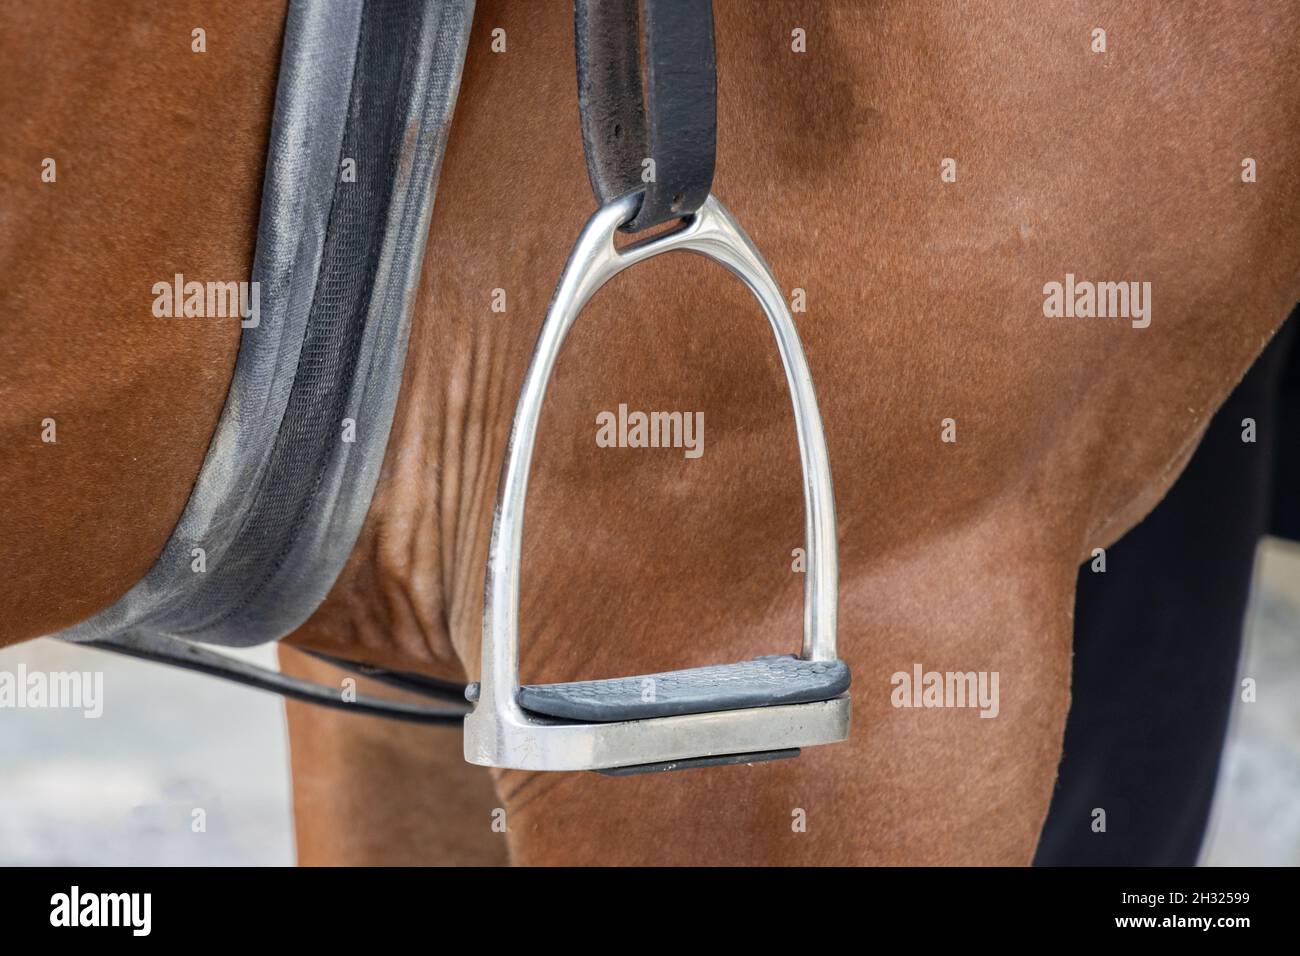 Horse bridles harness hanging Stock Photo